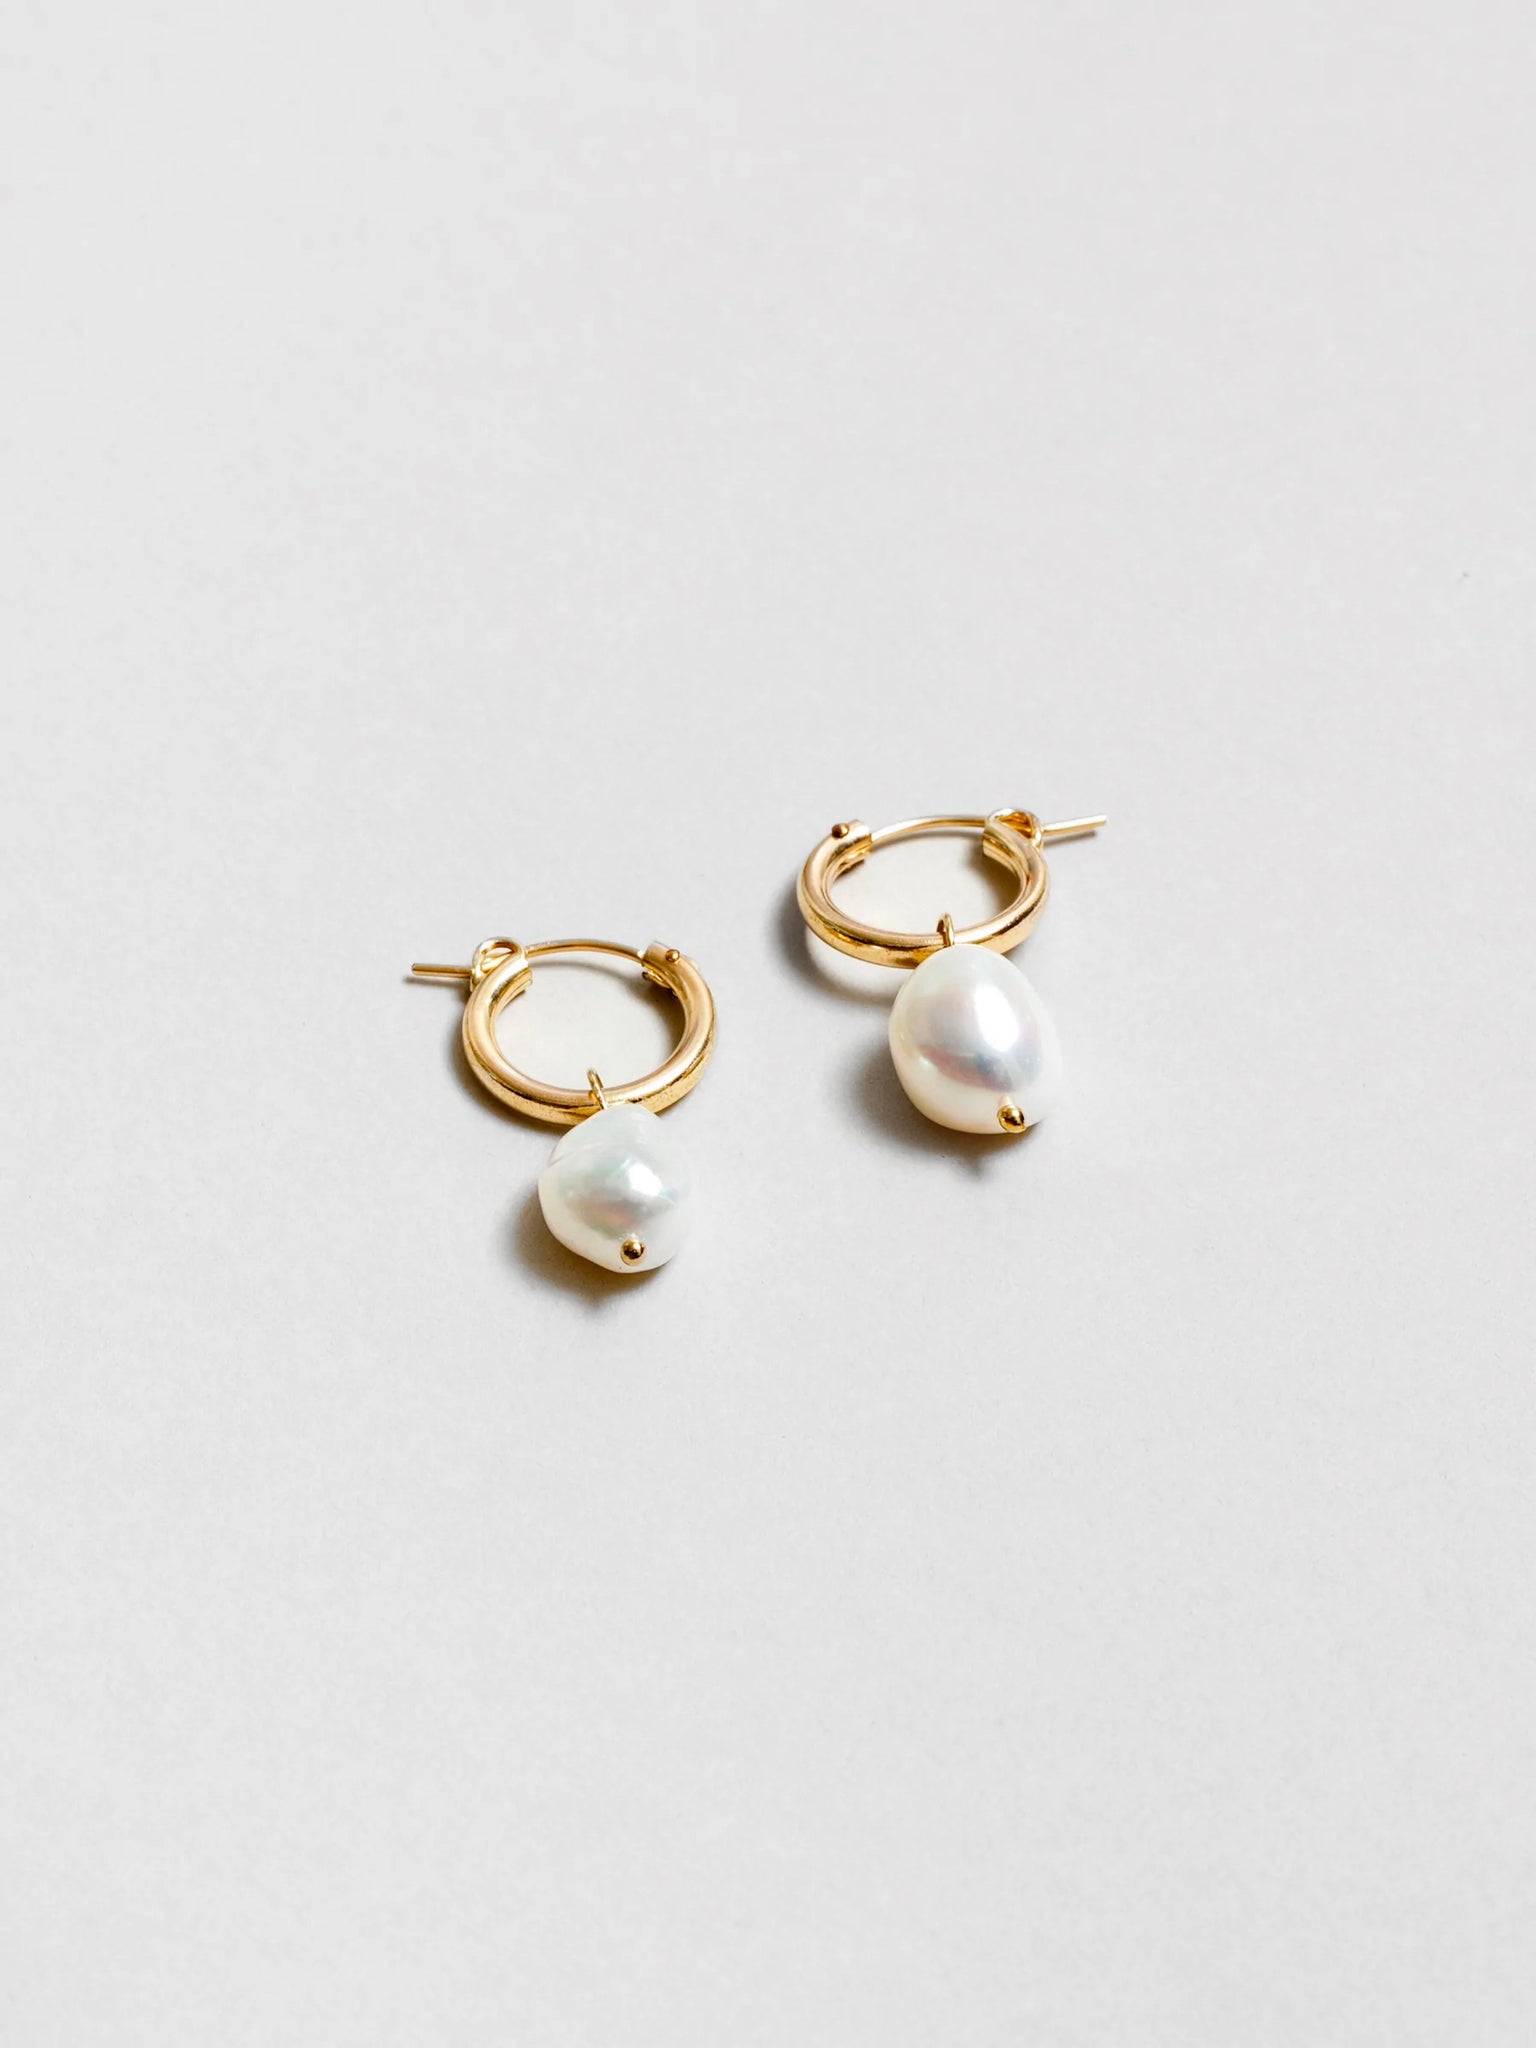 Wolf Circus Pearl Hoop Earrings in Gold | 14k Gold Hinged Hoops with Removable Freshwater Pearl-Earrings-wolfcircus.com